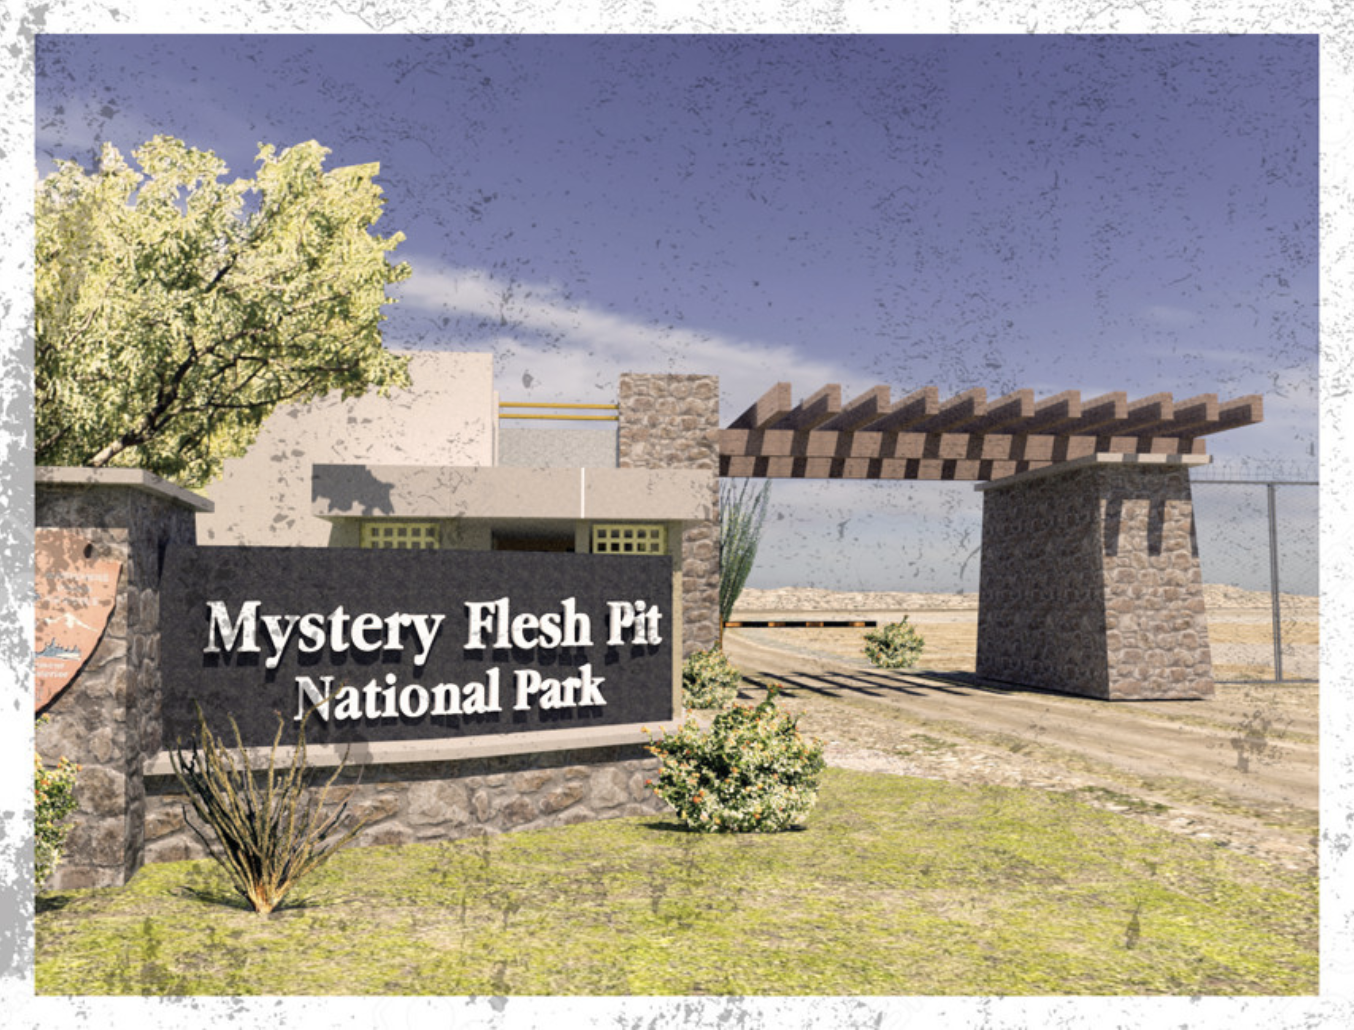 A national park entryway and ranger station with the sign "Mystery Flesh Pit National Park" in front of the building. The surrounding landscape is dry and arid.